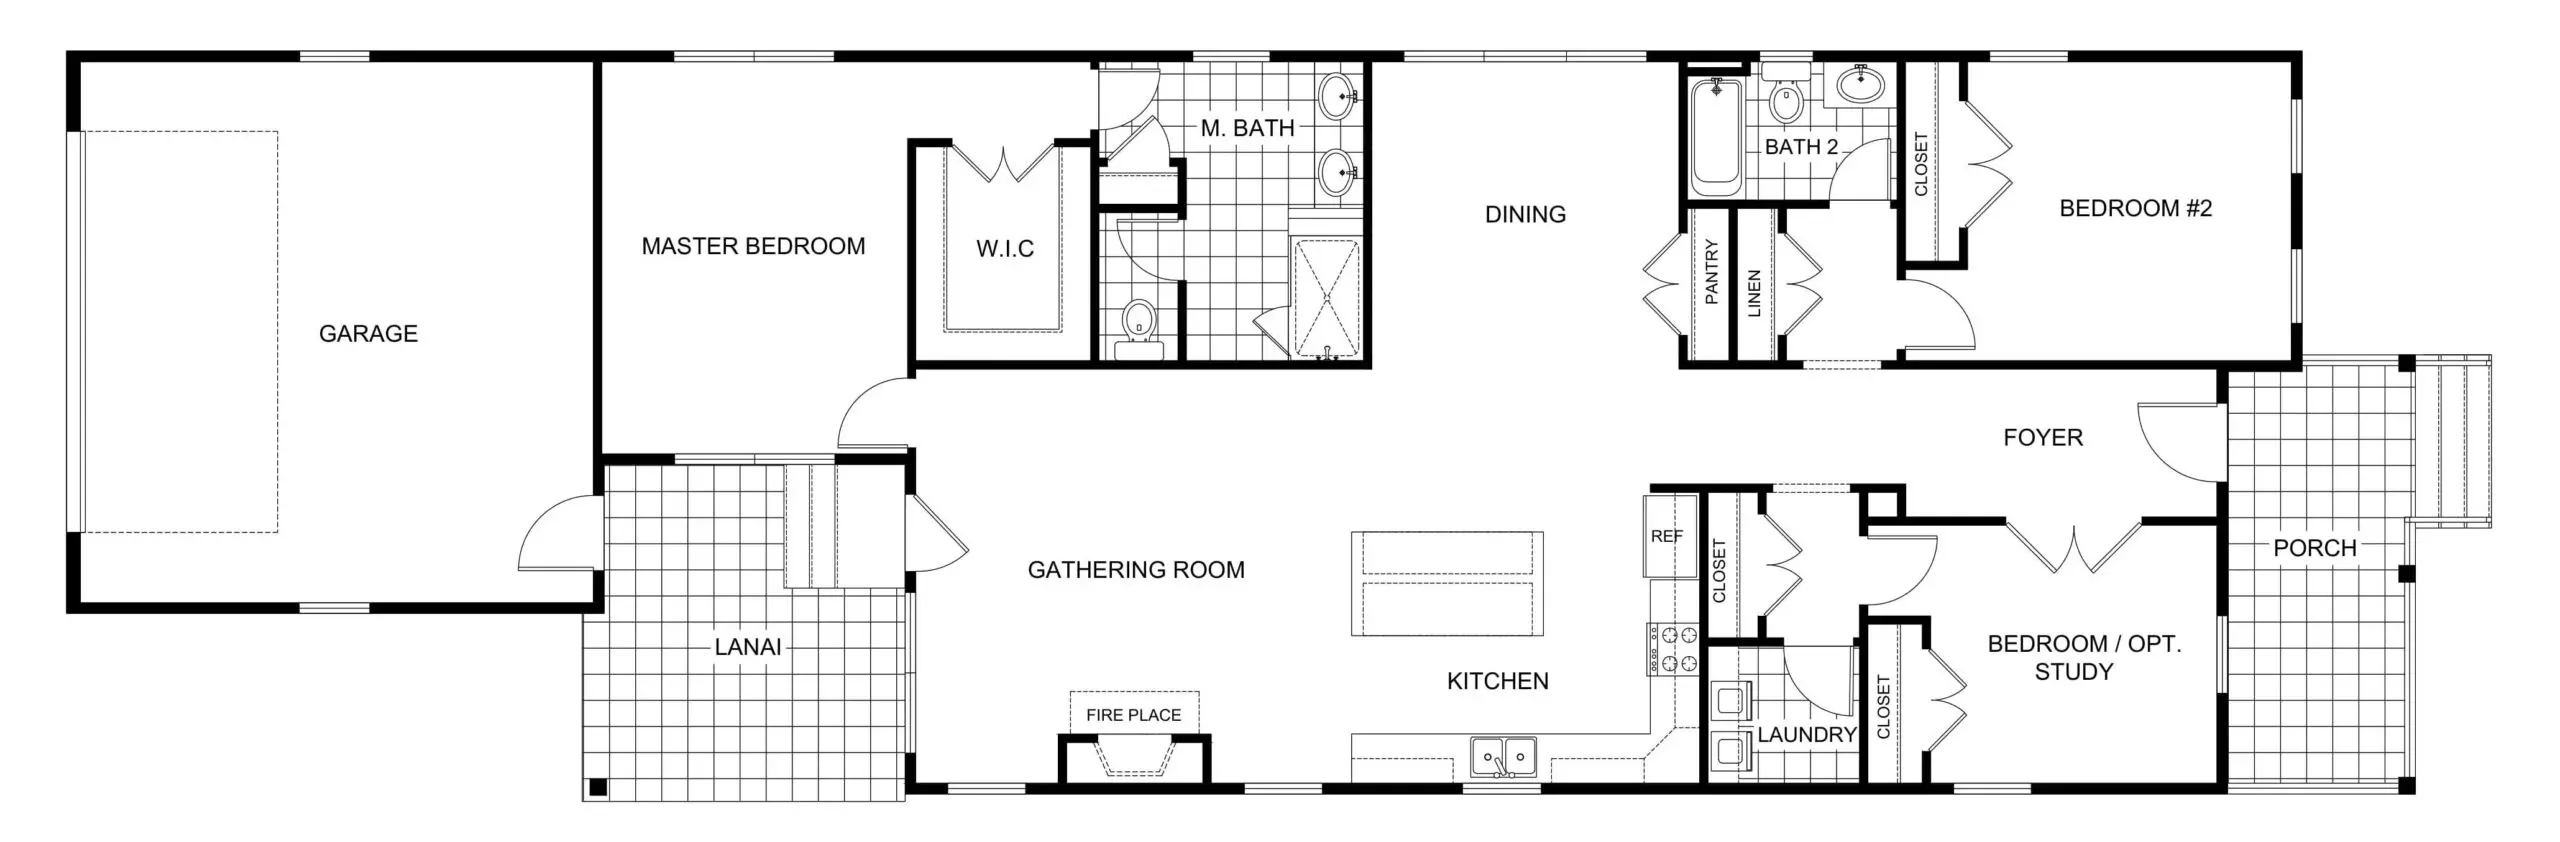 Designing a Functional House: The Thought Process Behind Our Floor Plan -  Plank and Pillow